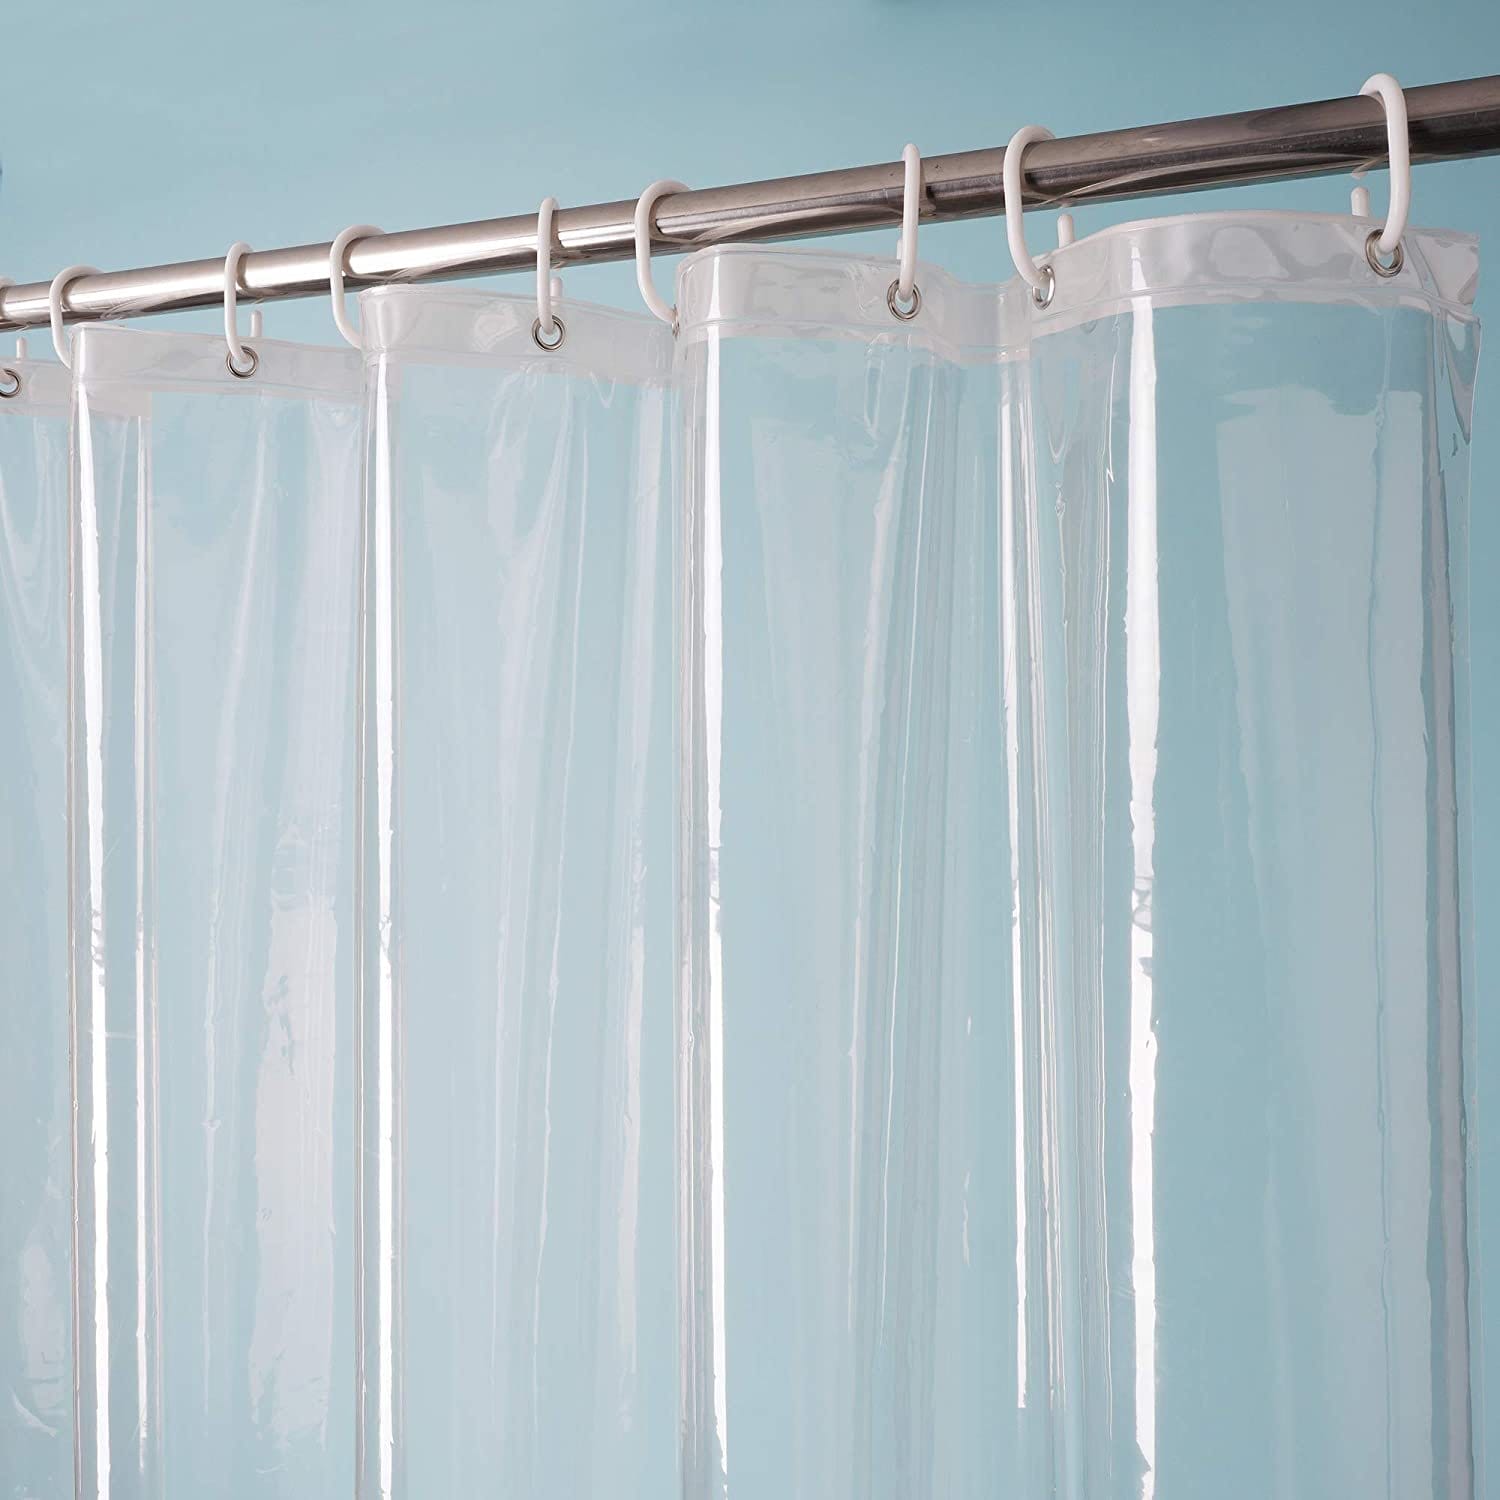 EurCross 9G Clear Shower Curtain Liner With Magnets